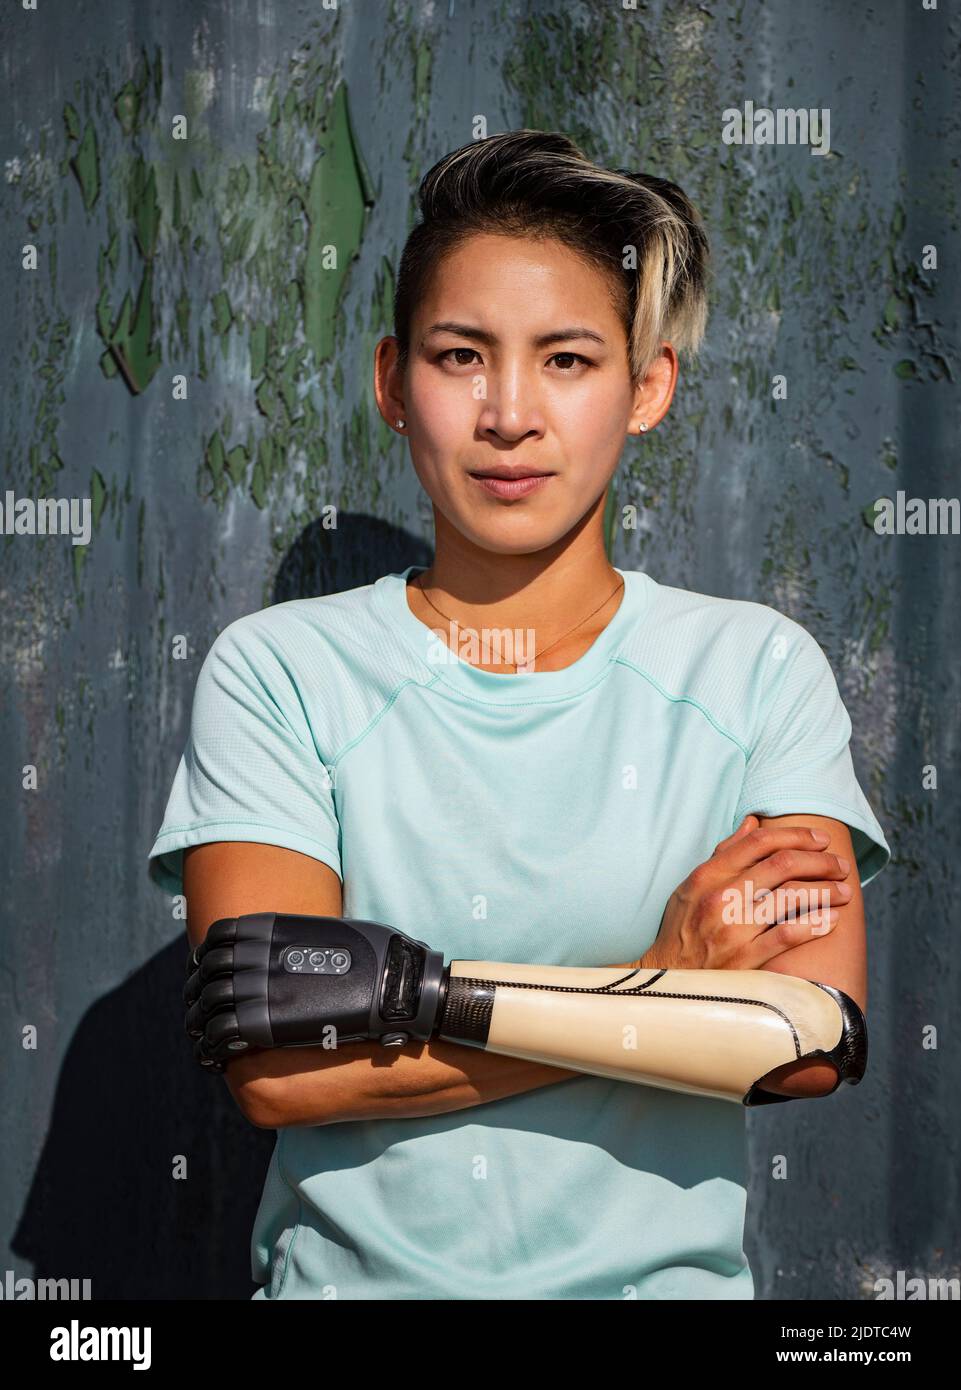 Portrait of athletic woman with prosthetic arm Stock Photo